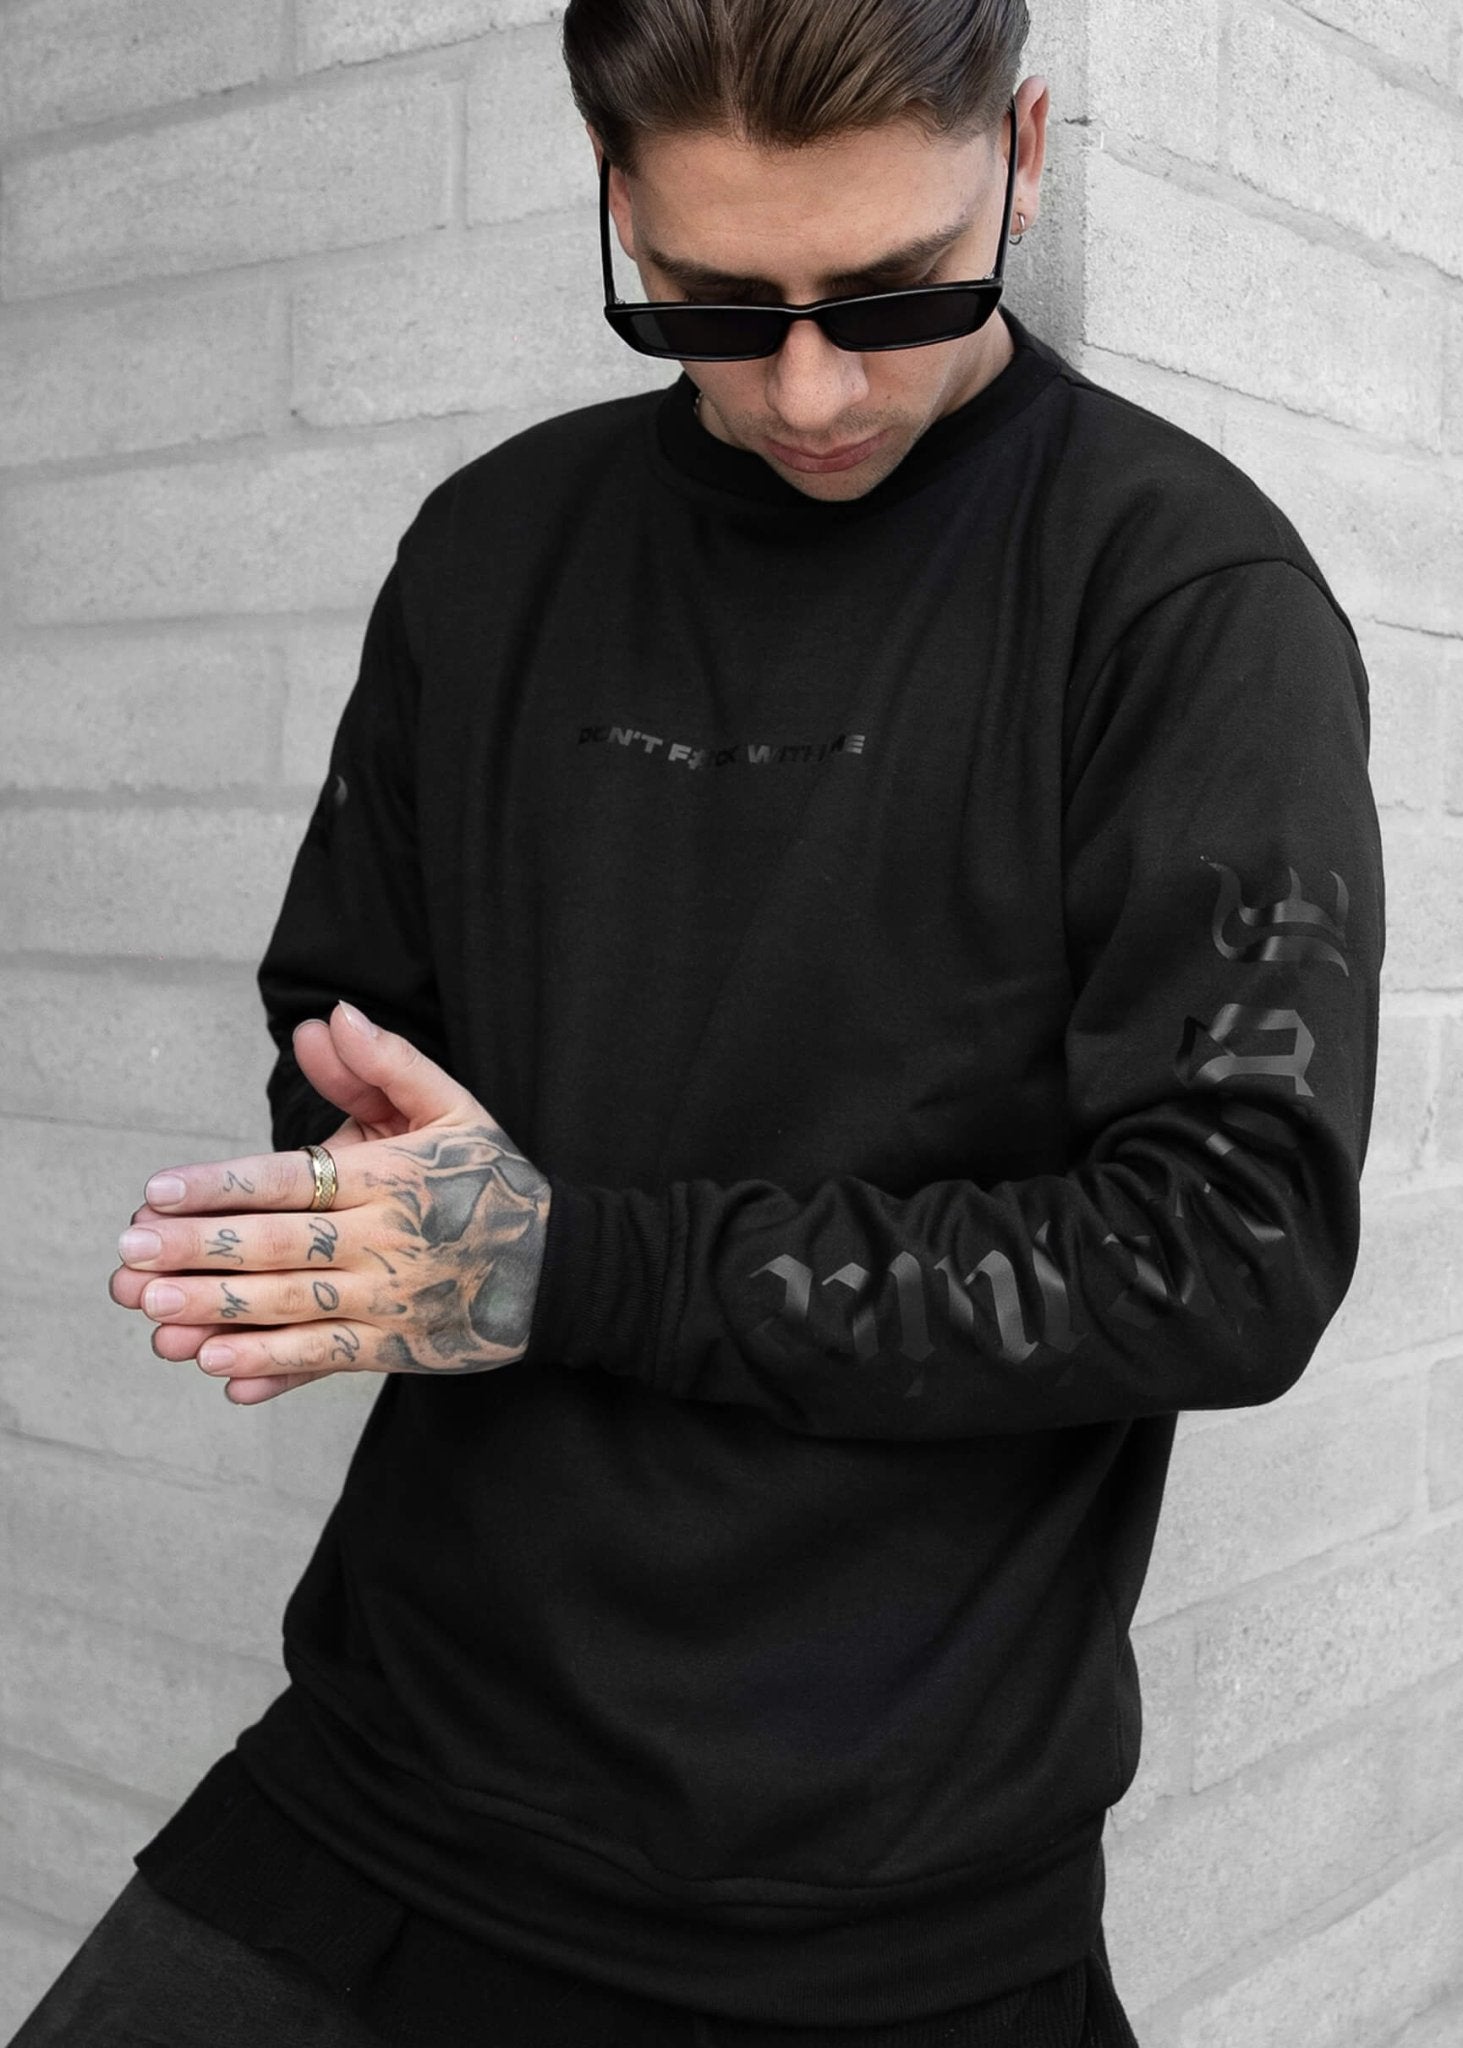 FRS All Black - Buzo Negro - FRSClothes